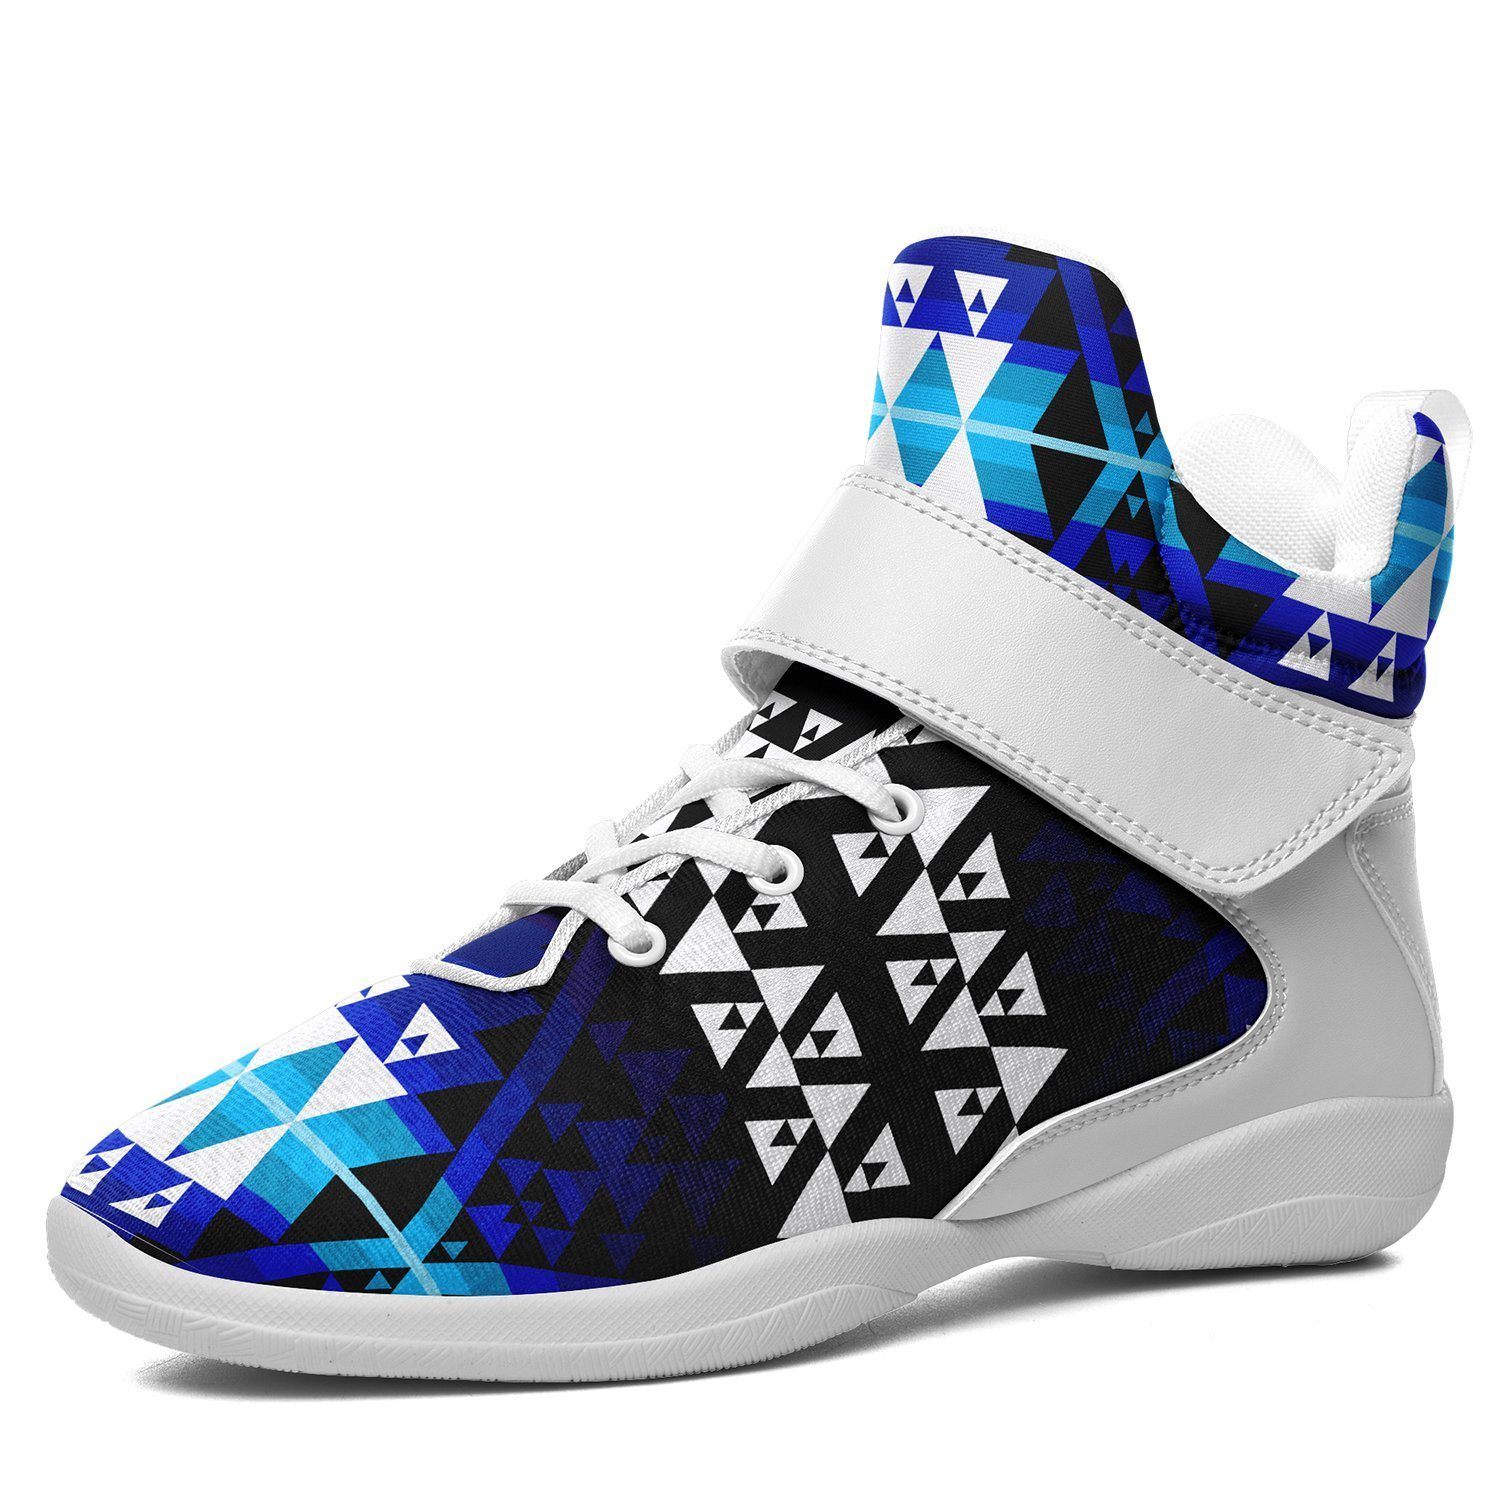 Writing on Stone Night Watch Kid's Ipottaa Basketball / Sport High Top Shoes 49 Dzine US Child 12.5 / EUR 30 White Sole with White Strap 